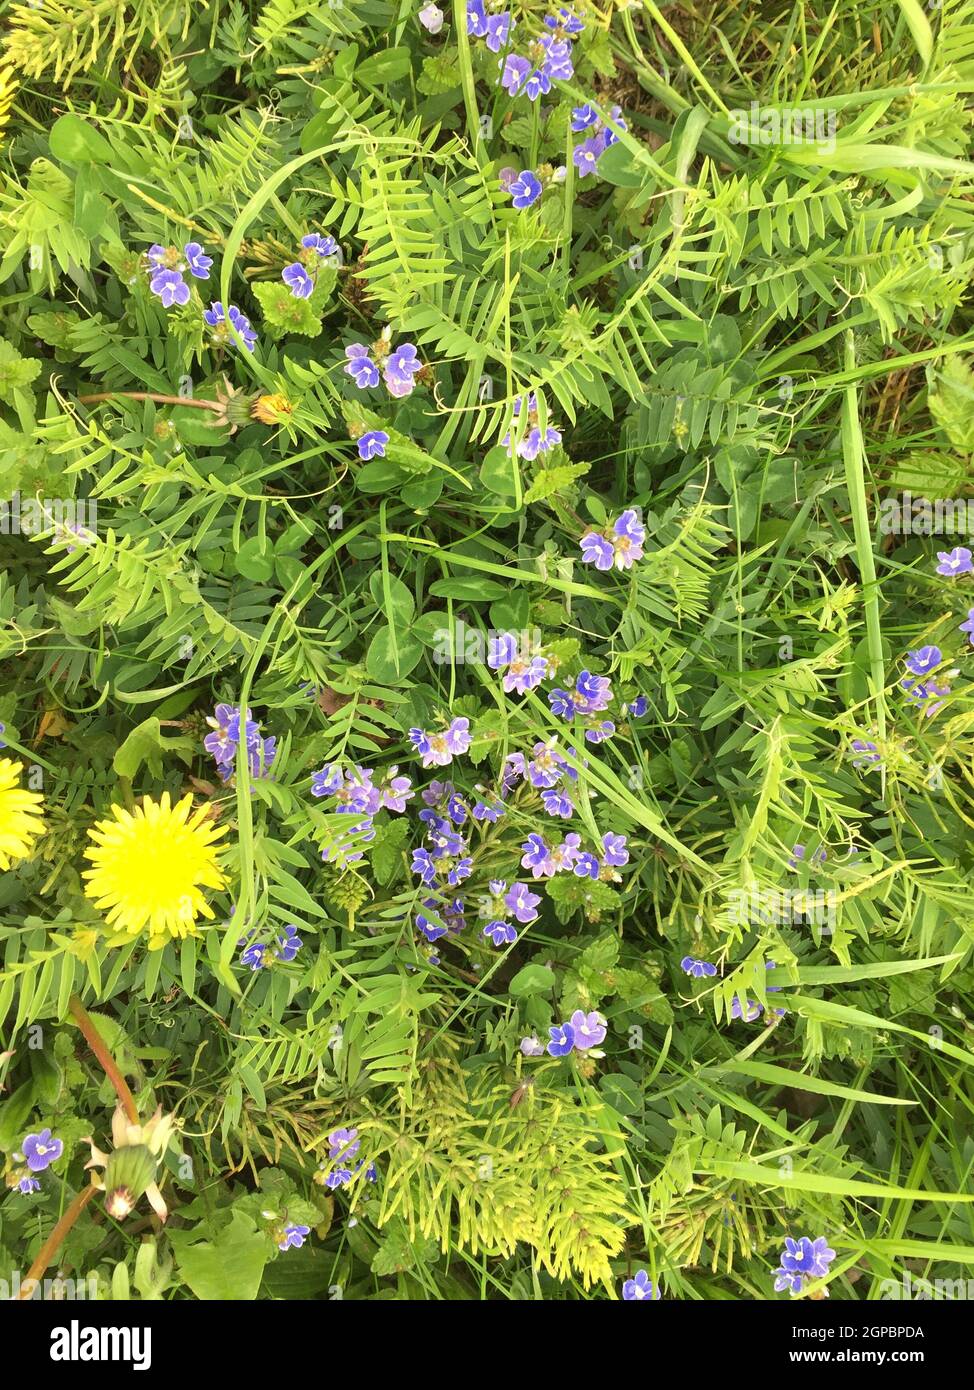 Scenic view of Germander speedwell flowers with green leaves Stock Photo